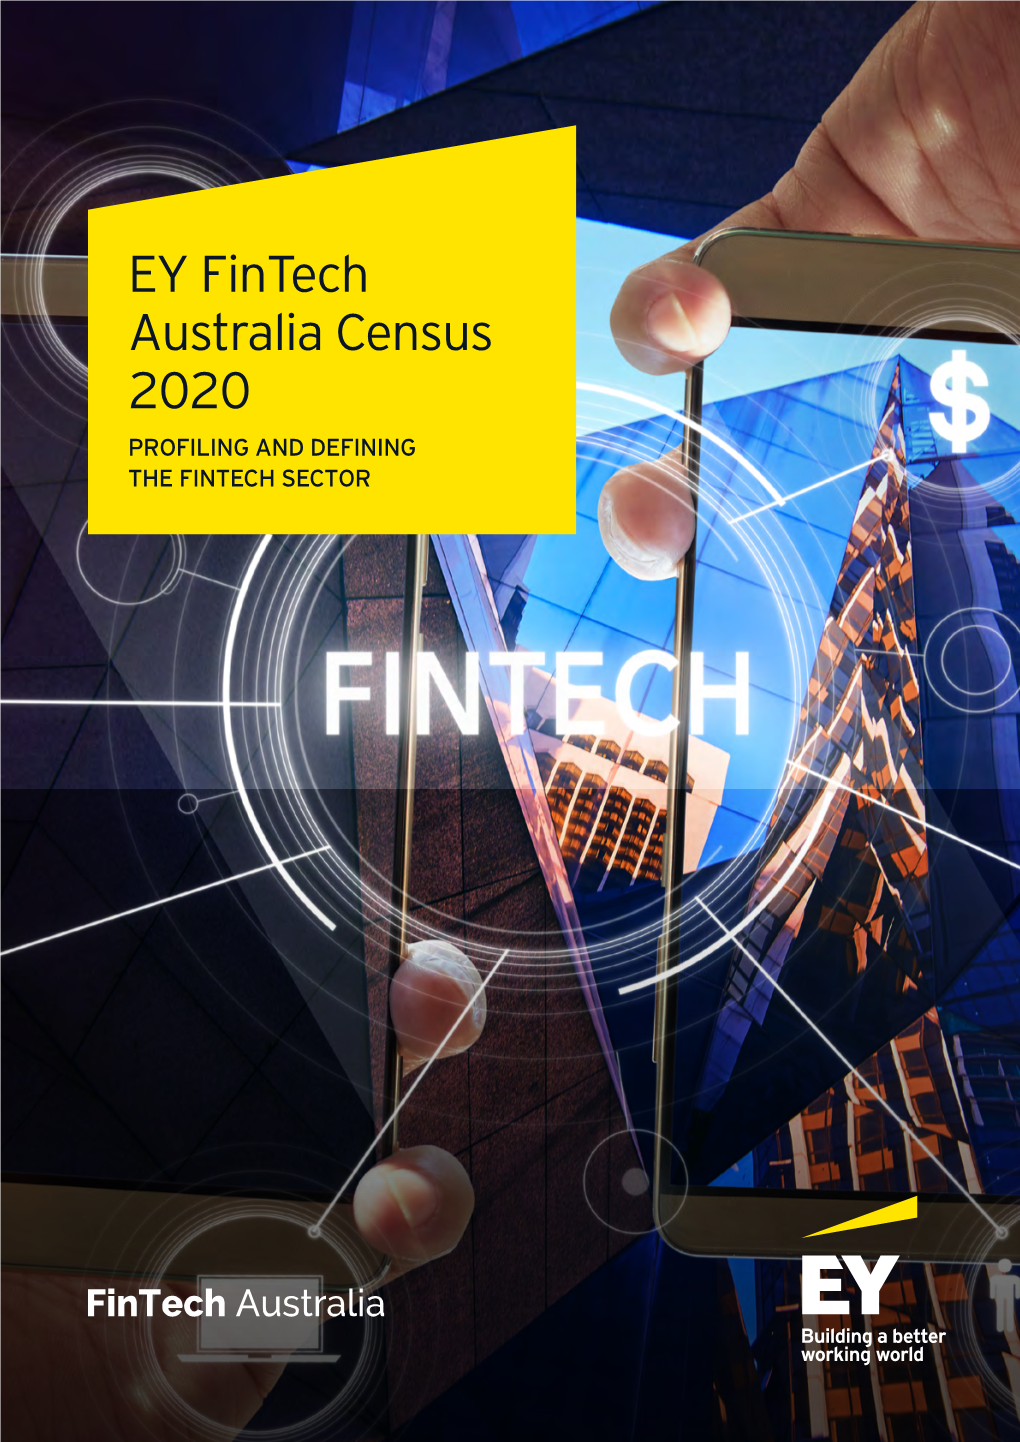 EY Fintech Australia Census 2020 PROFILING and DEFINING the FINTECH SECTOR Contents